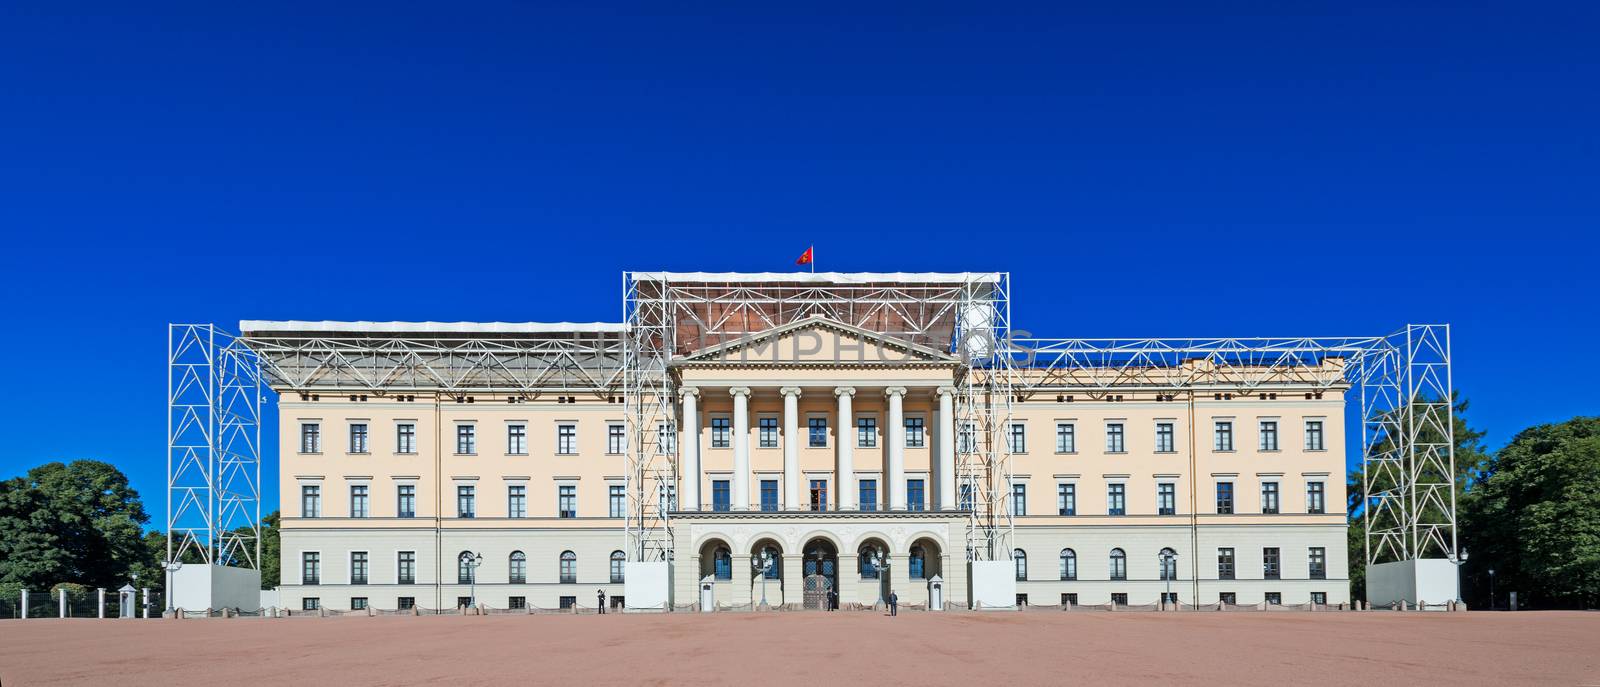 The Royal Palace in Oslo Norway by Nanisimova